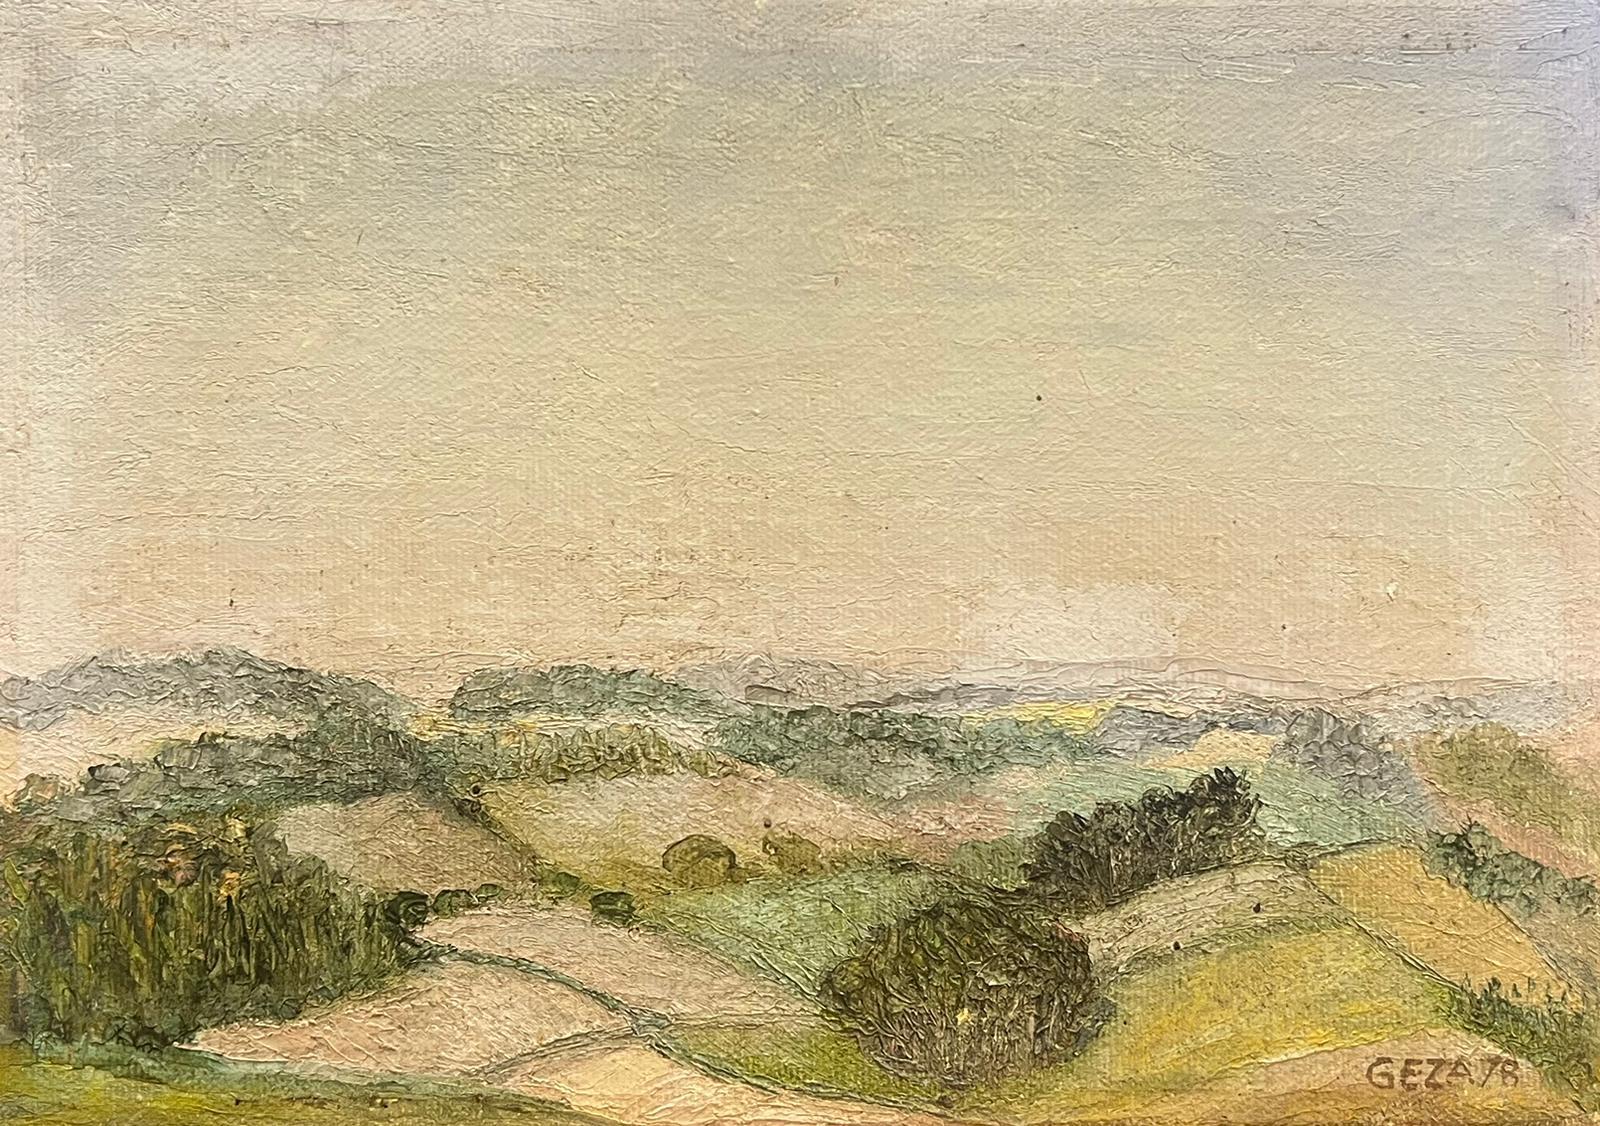 Geza Somerset-Paddon Landscape Painting - Contemporary British Oil Painting Open Green Field Landscape